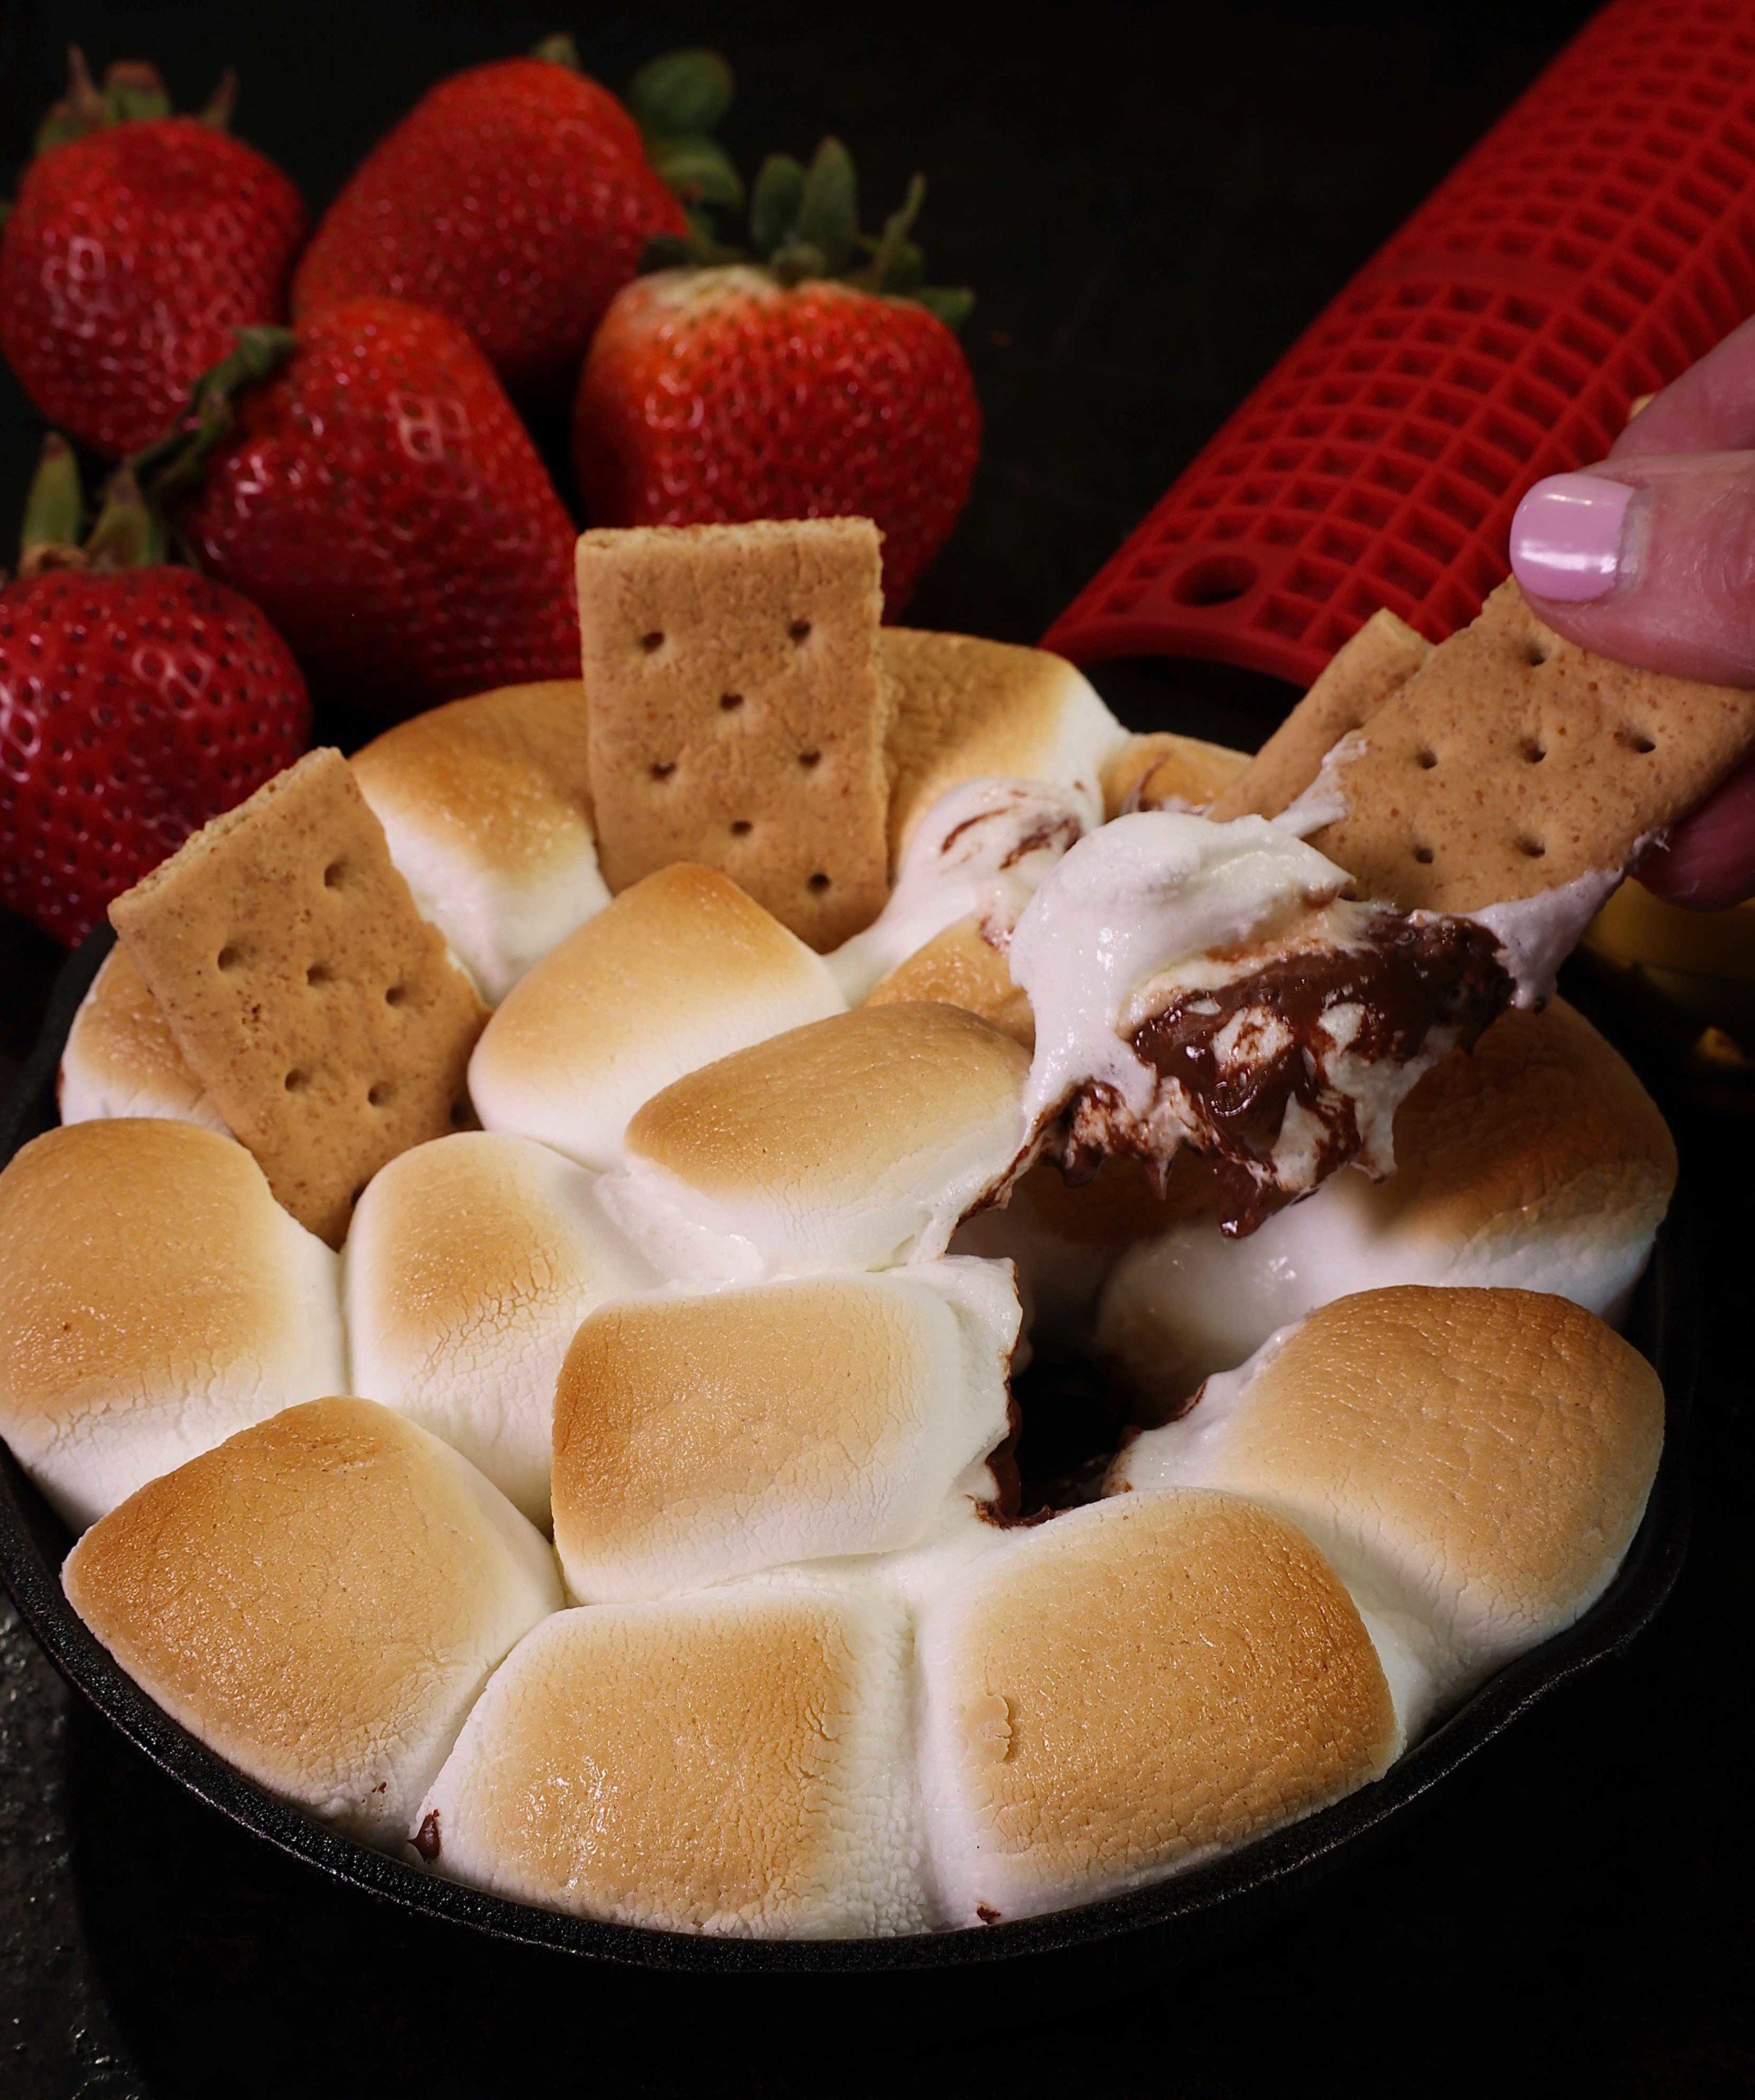 a graham cracker dipped into a skillet filled with melted chocolate and toasted marshmallows